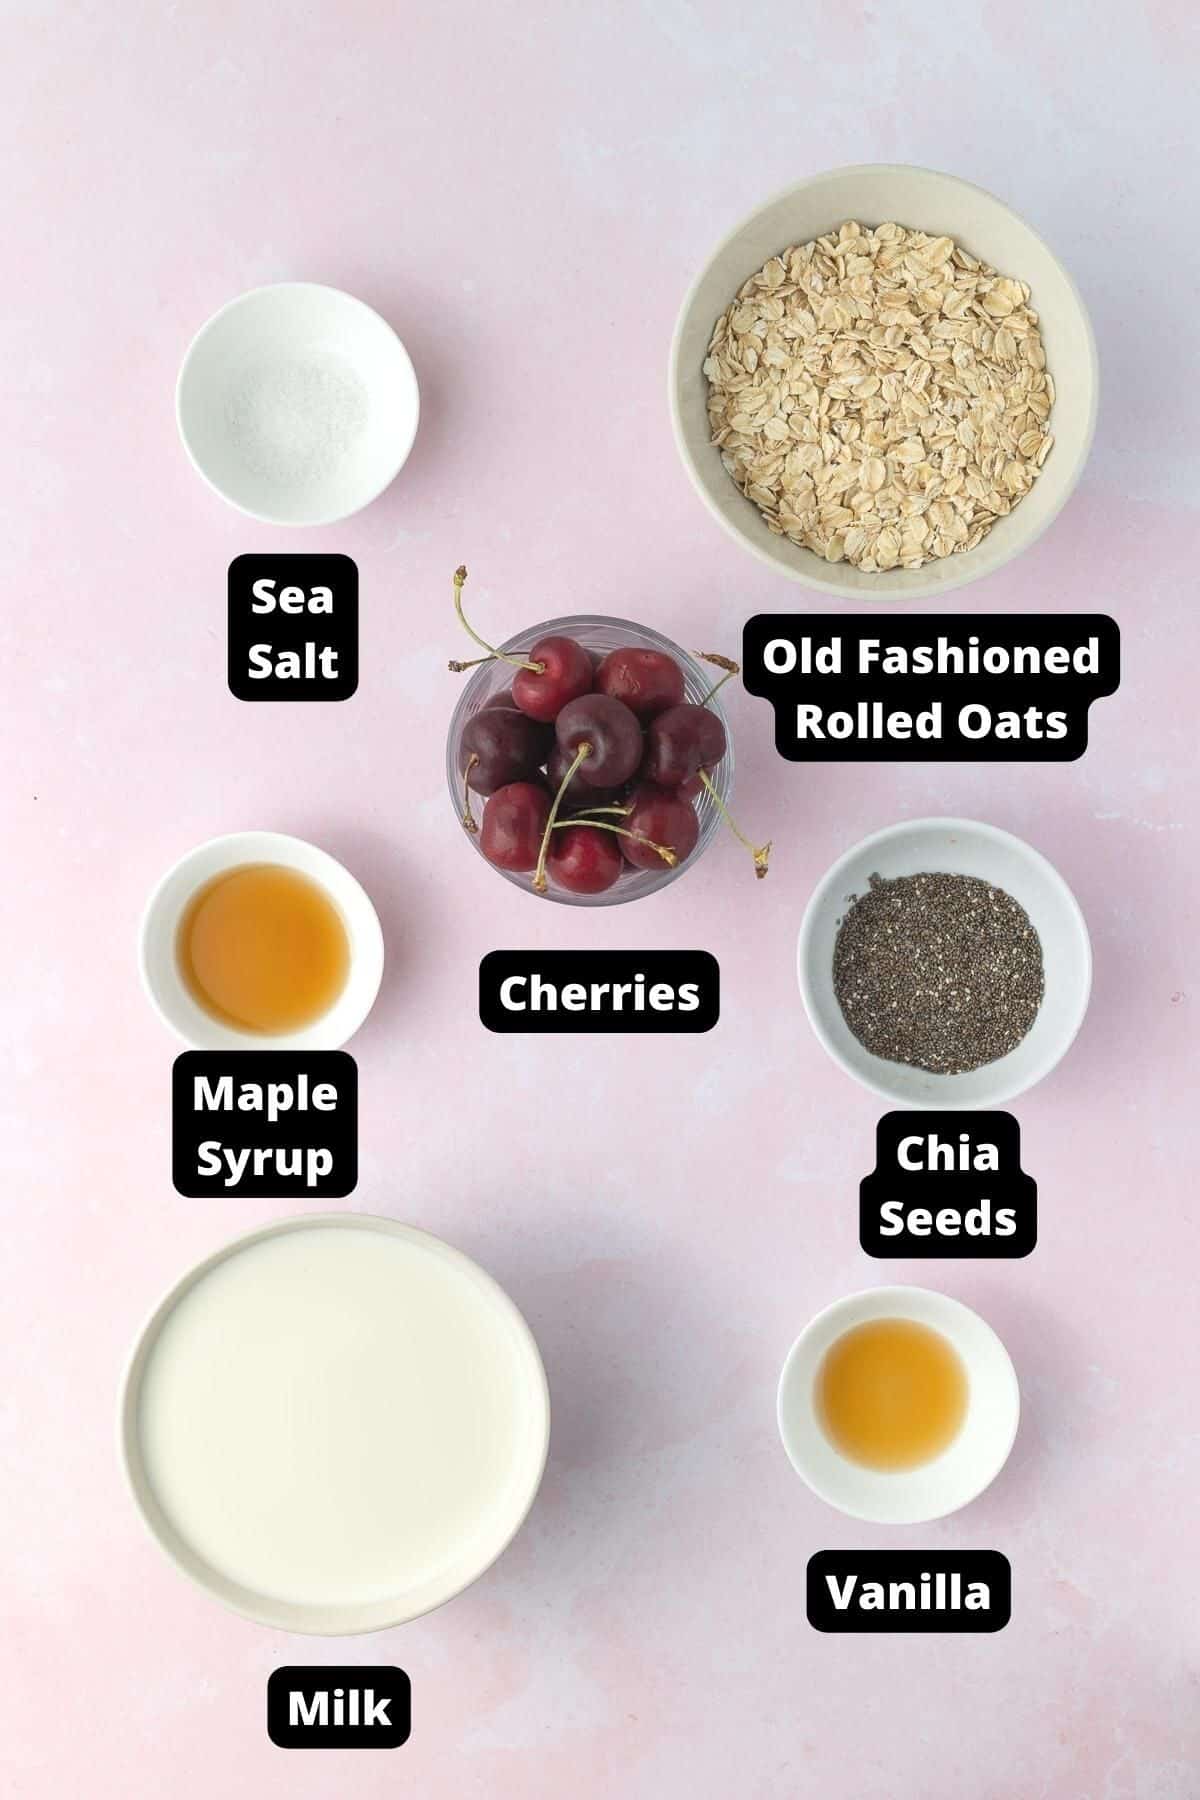 Ingredients in this recipe on a pink background.